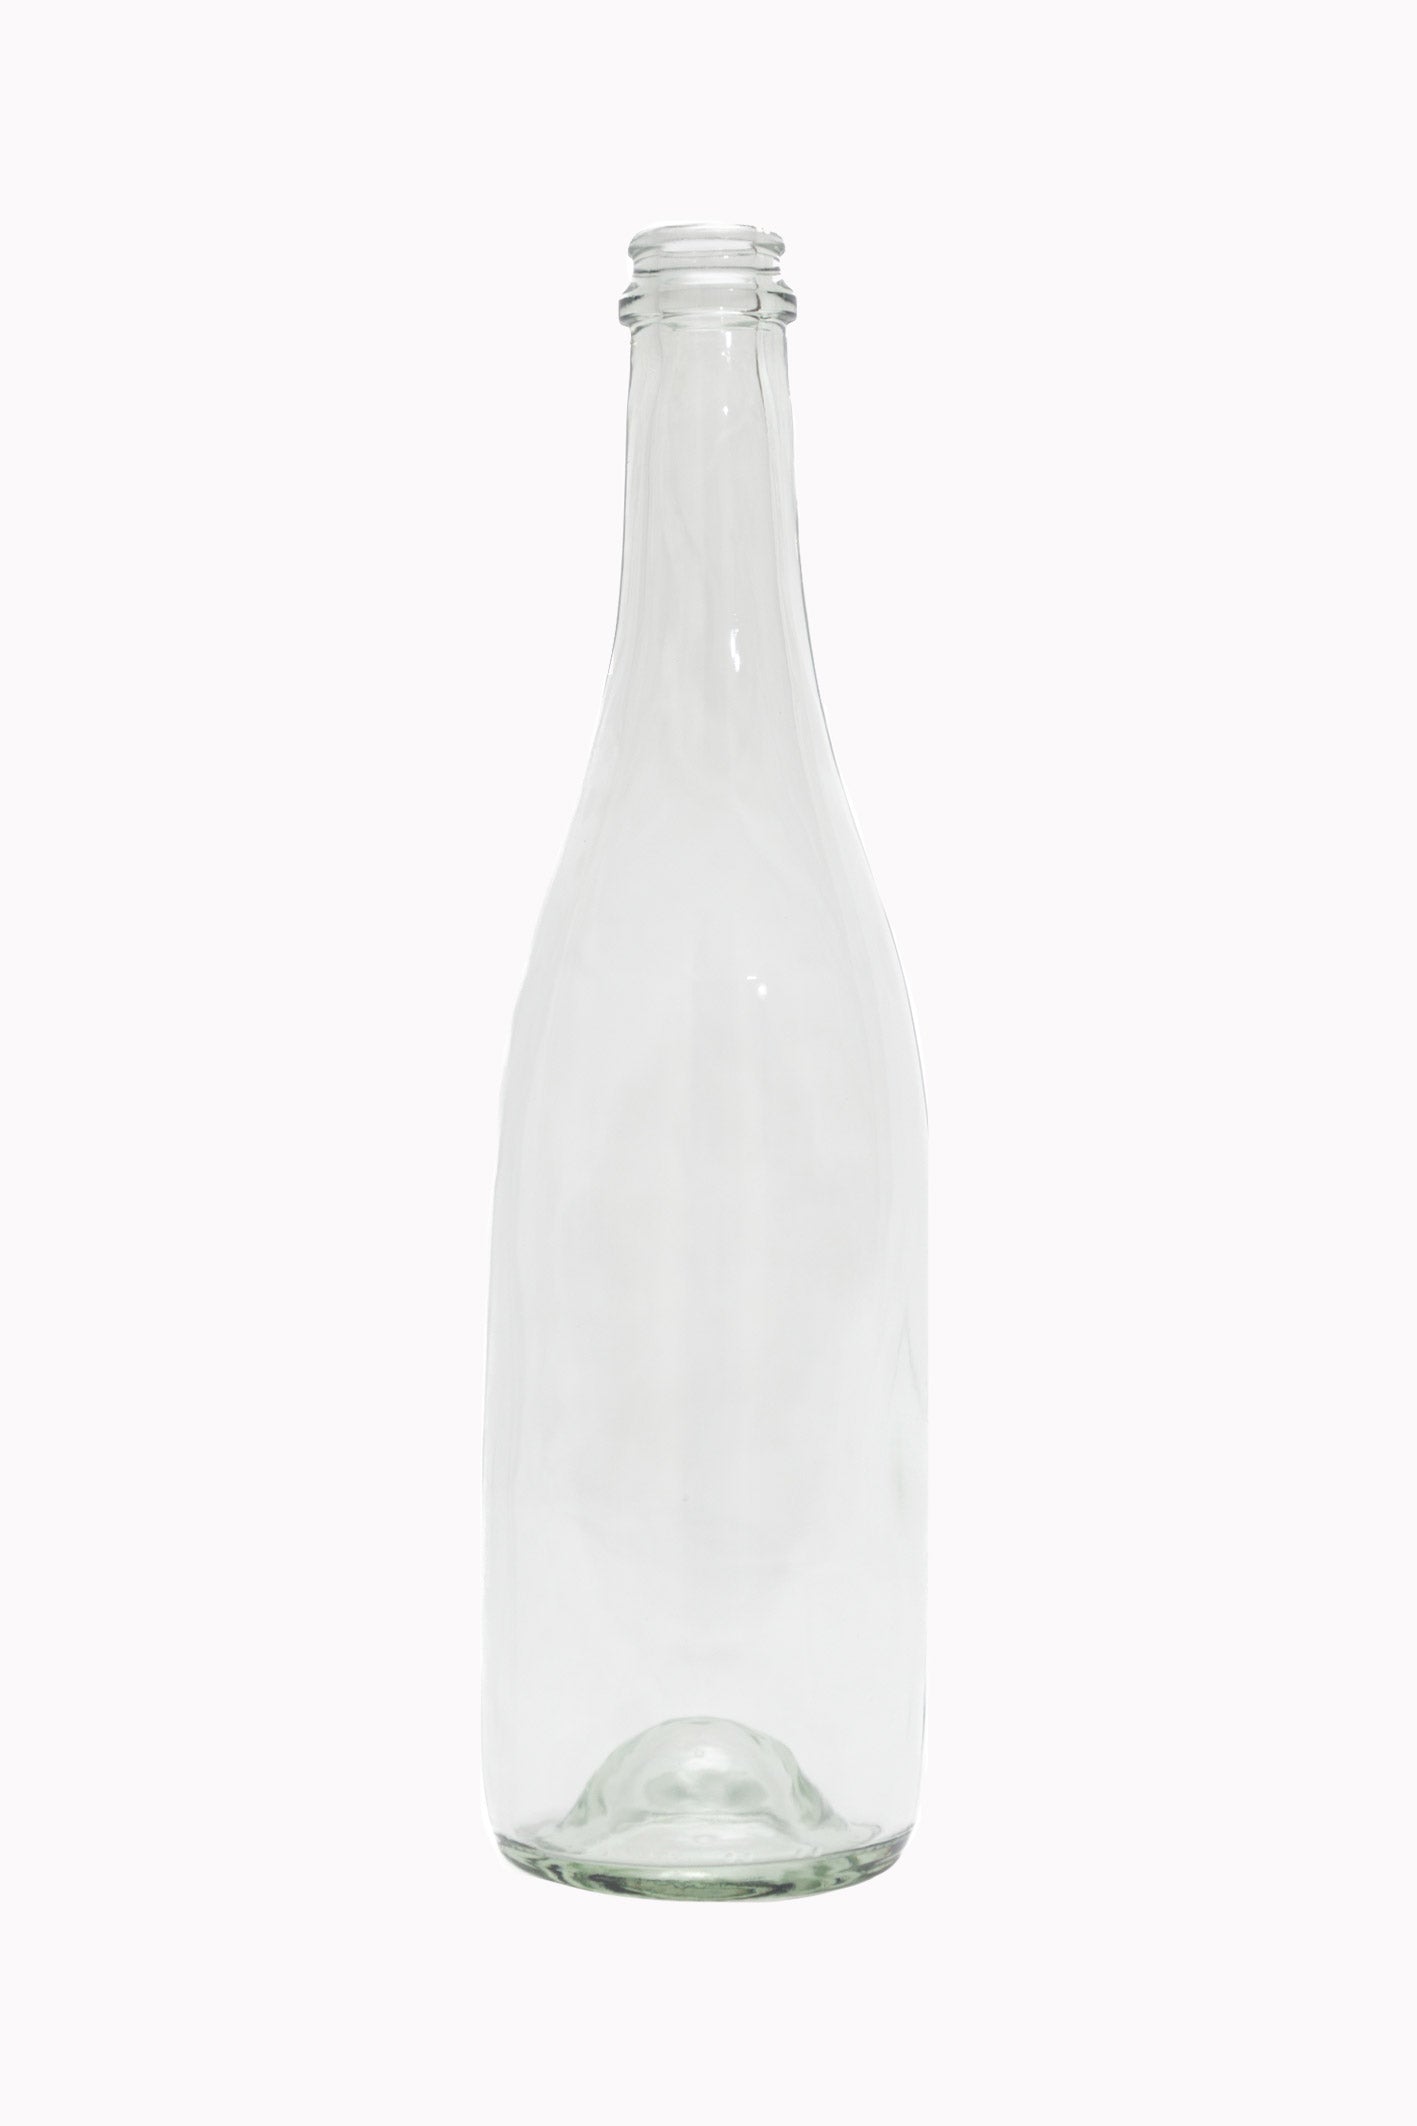 This is 7023 FL, also known as Juliet, California Bottles’ flagship Flint Sparkling (Champagne) bottle.